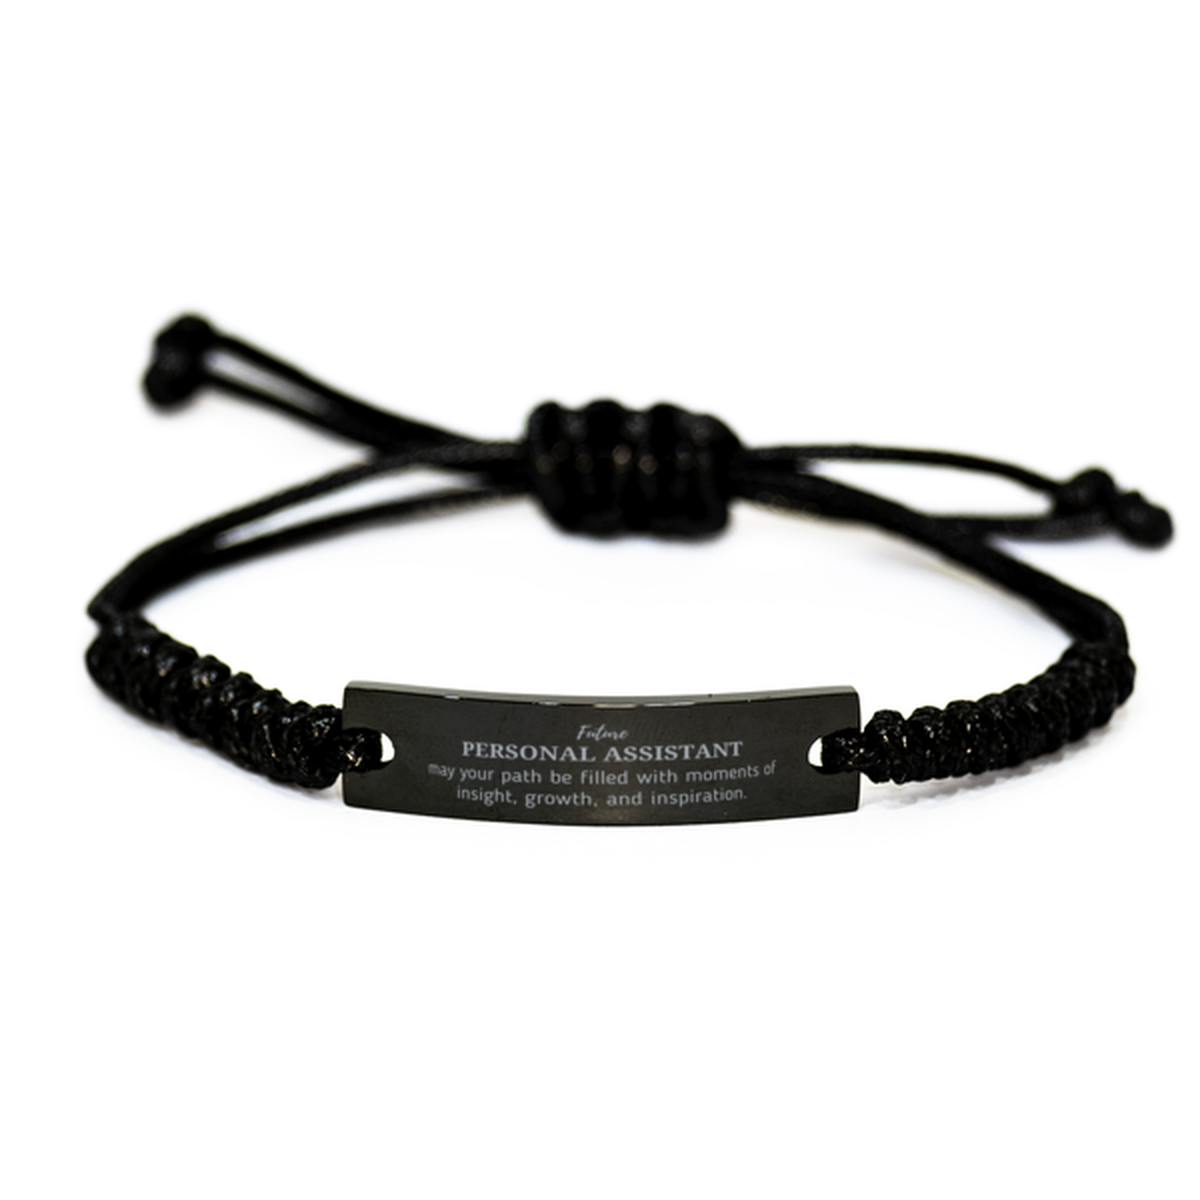 Future Personal Assistant Gifts, May your path be filled with moments of insight, Graduation Gifts for New Personal Assistant, Christmas Unique Black Rope Bracelet For Men, Women, Friends